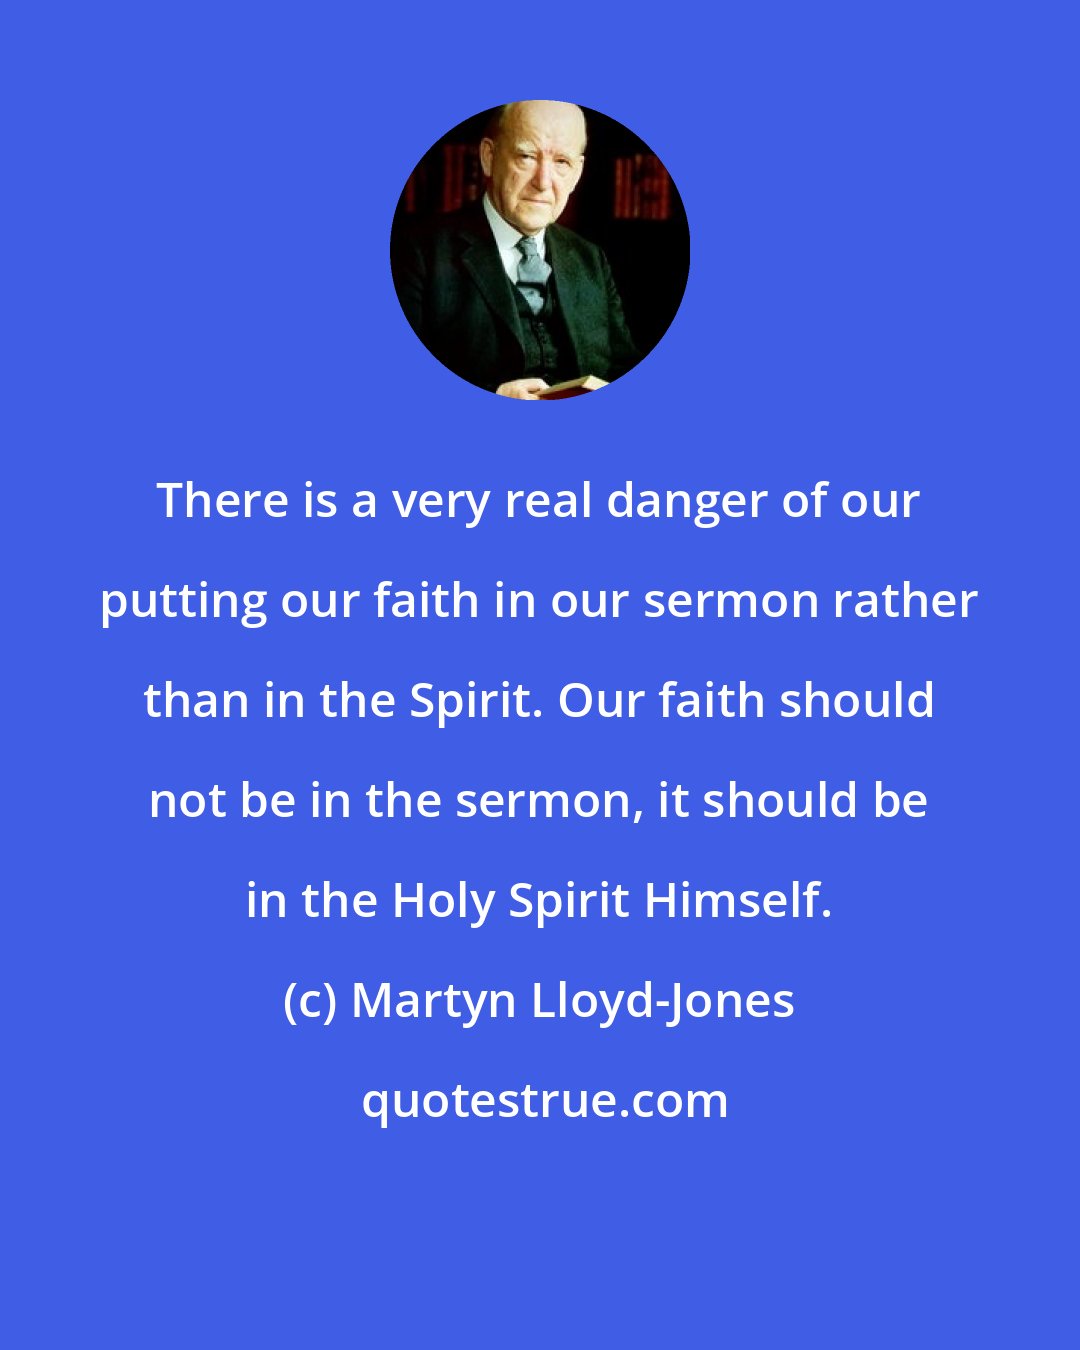 Martyn Lloyd-Jones: There is a very real danger of our putting our faith in our sermon rather than in the Spirit. Our faith should not be in the sermon, it should be in the Holy Spirit Himself.